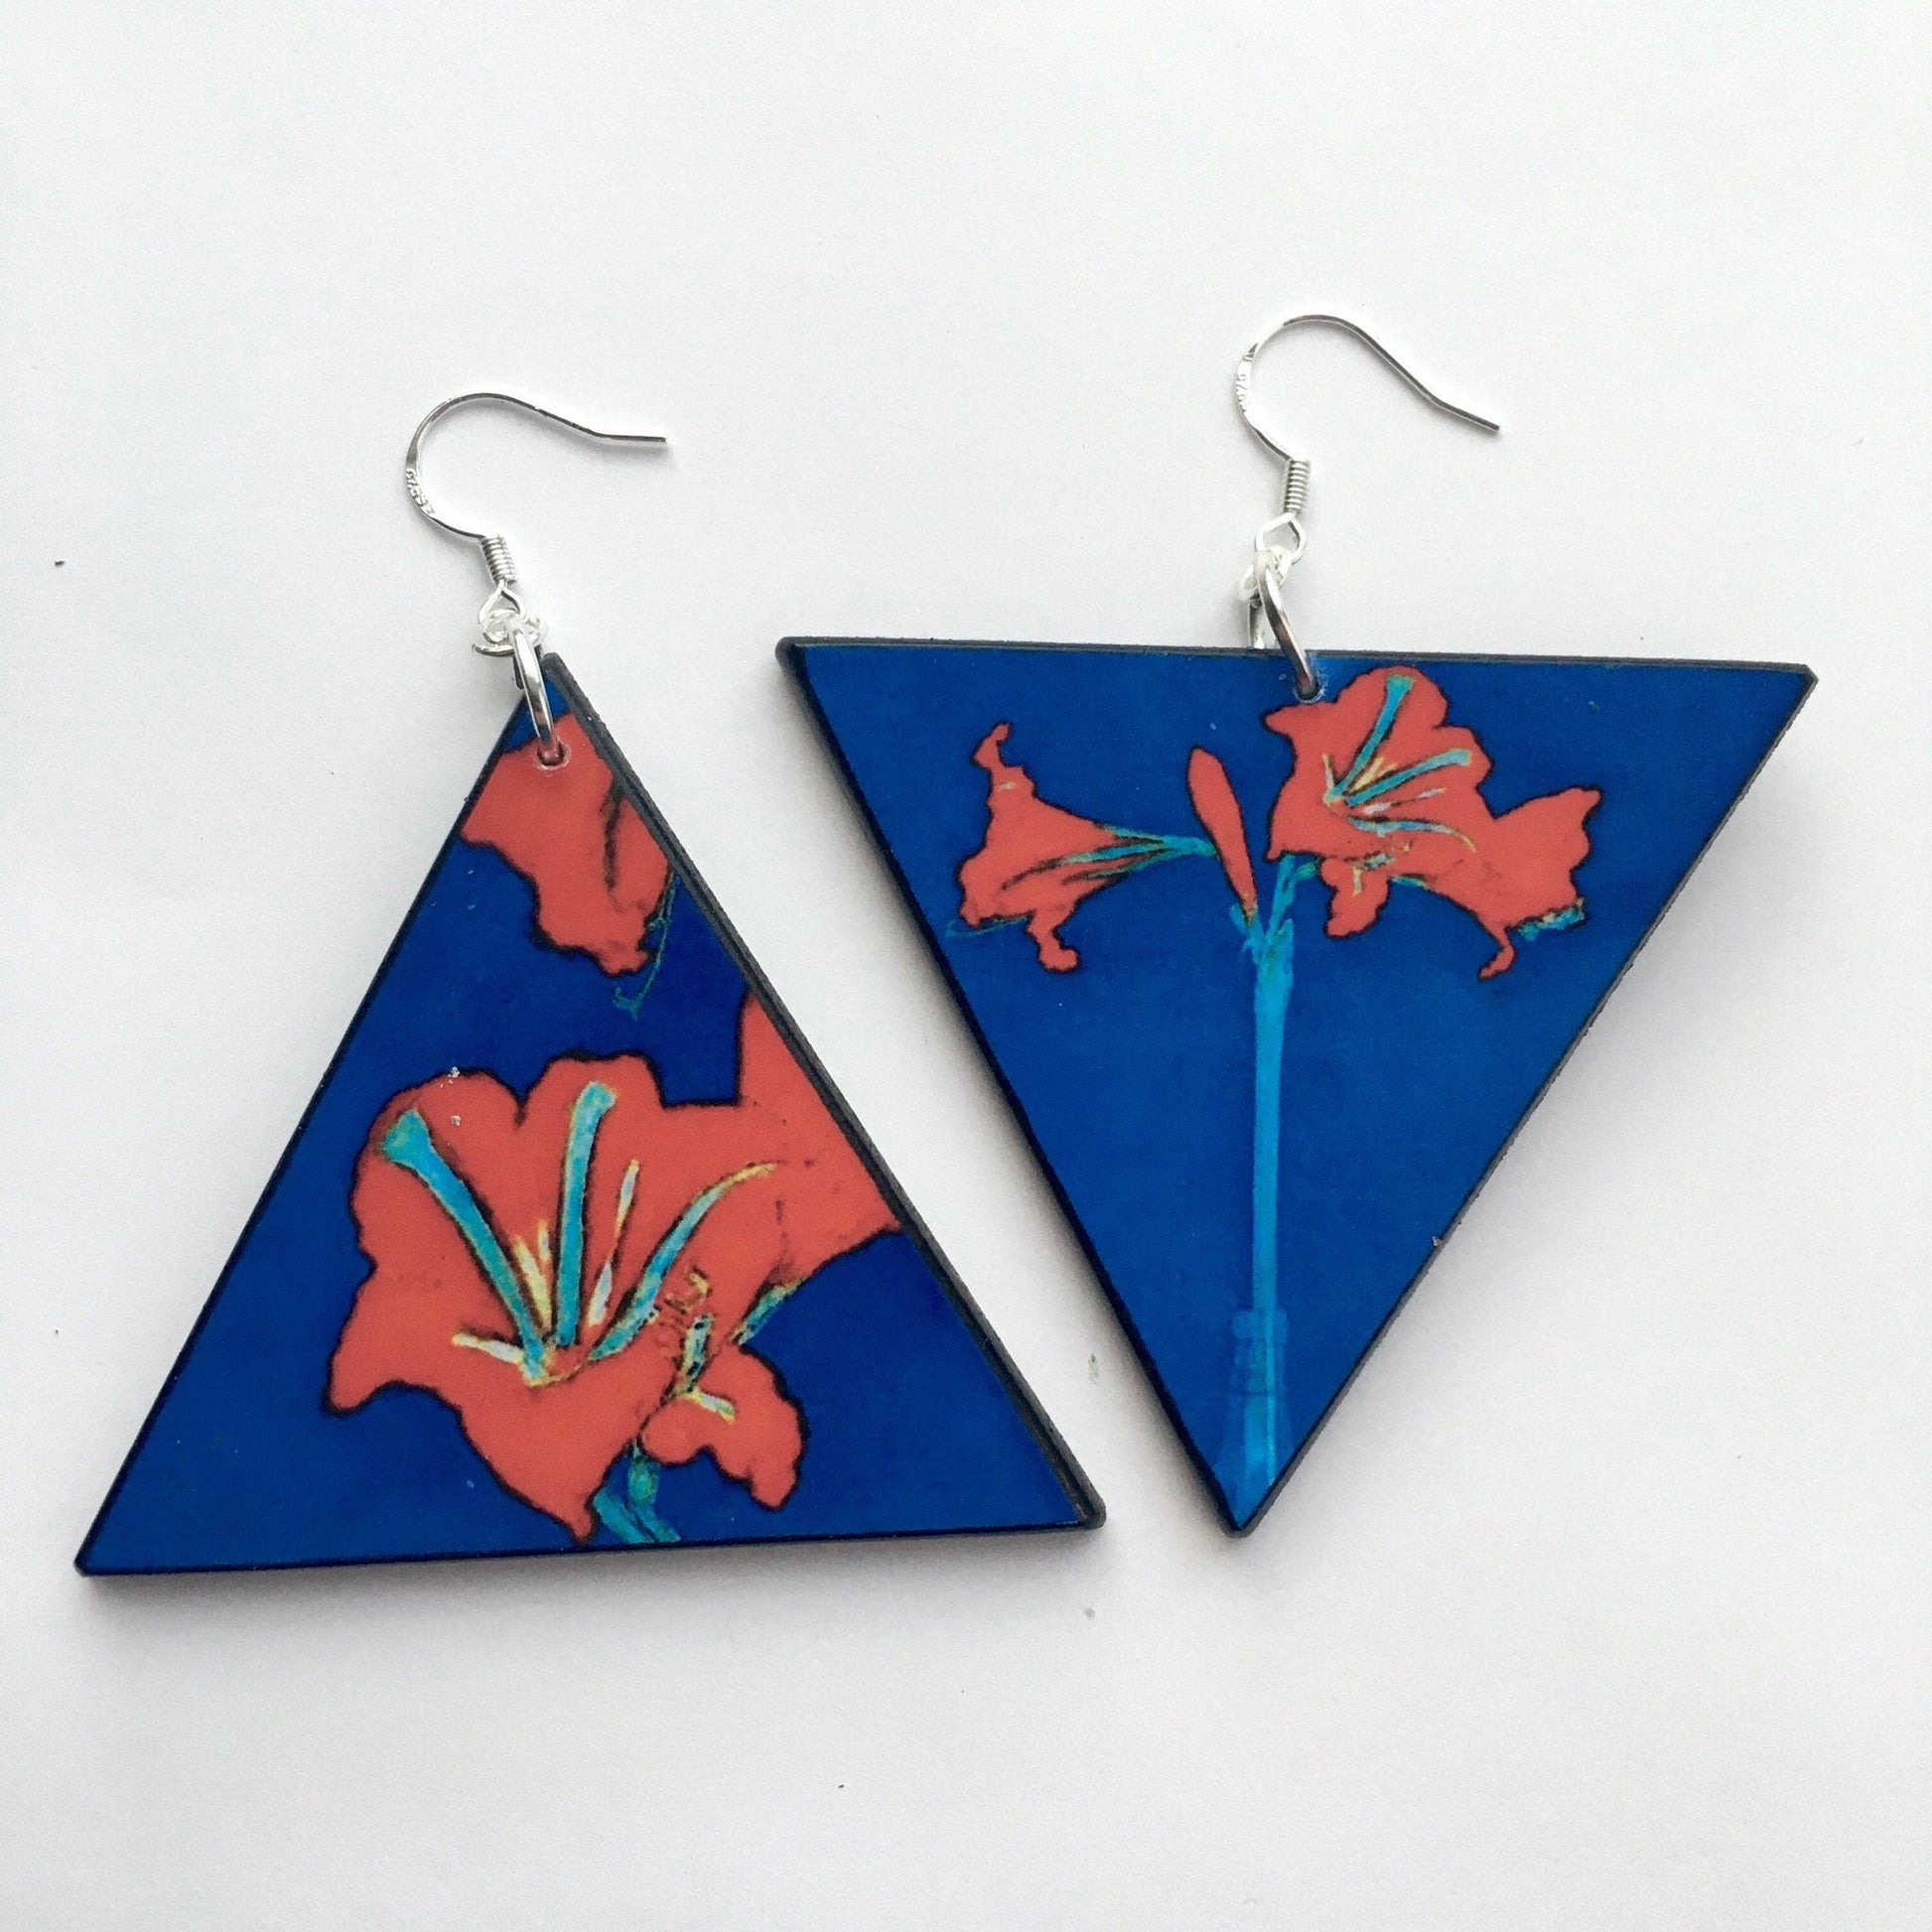 Triangle earrings with an art detail of Mondrian painting. Red flowers and blue color. Sustainable handmade earrings on wood by Obljewellery.